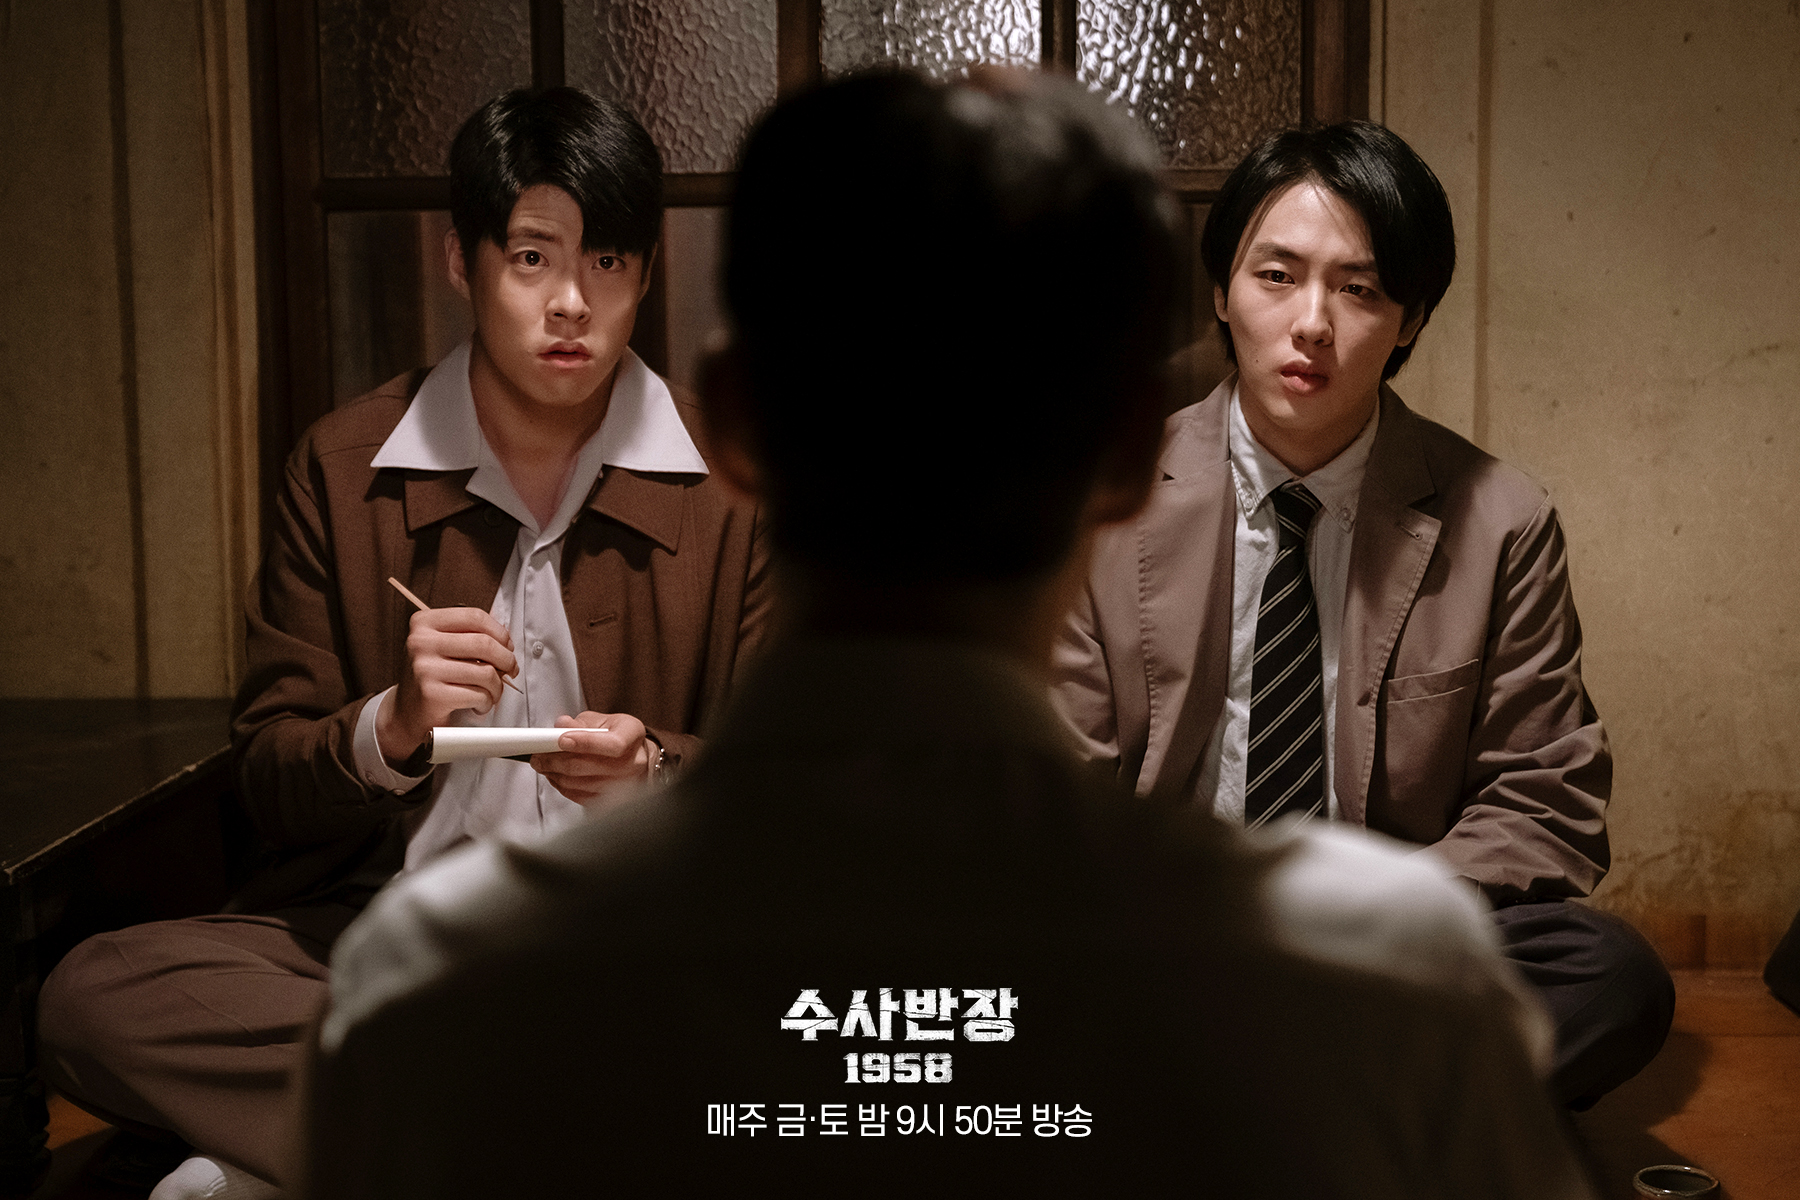 Lee Je Hoon, Lee Dong Hwi, Choi Woo Sung, And Yoon Hyun Soo Make A Tight-Knit Squad In 